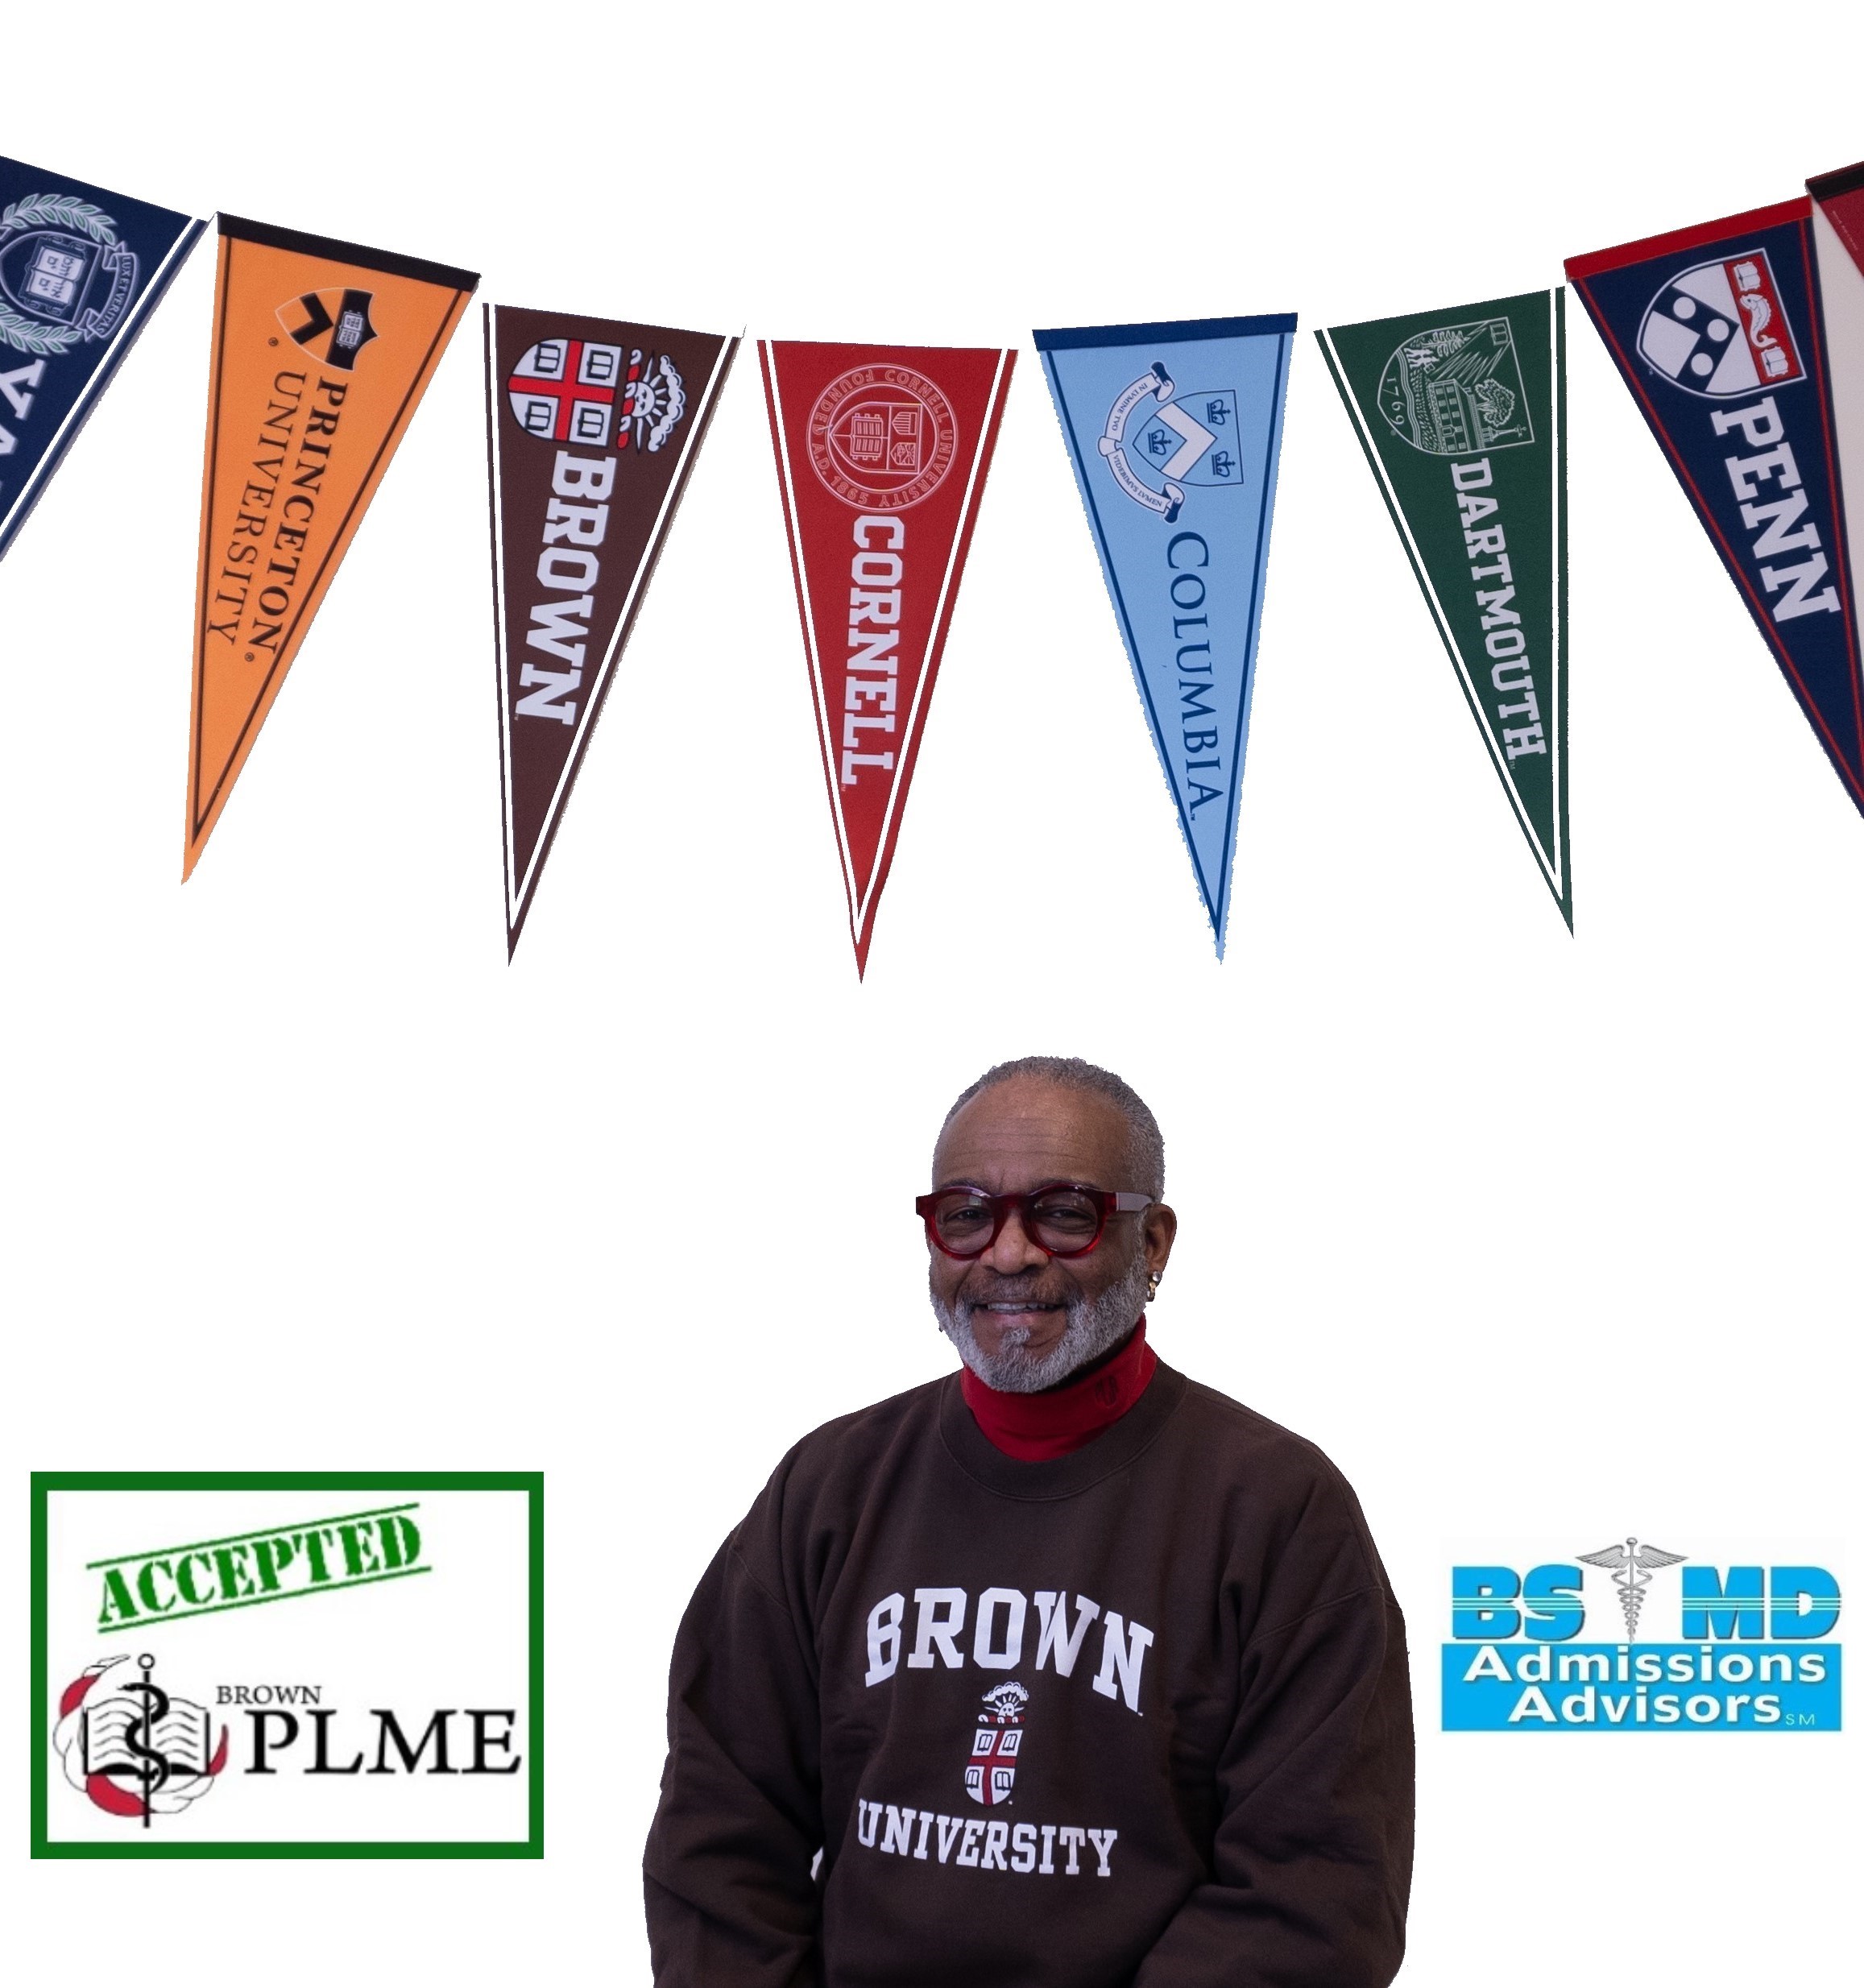 Dr_Paul_Lowe_Brown_PLME_Accepted_BS_MD_Admissions_Advisor